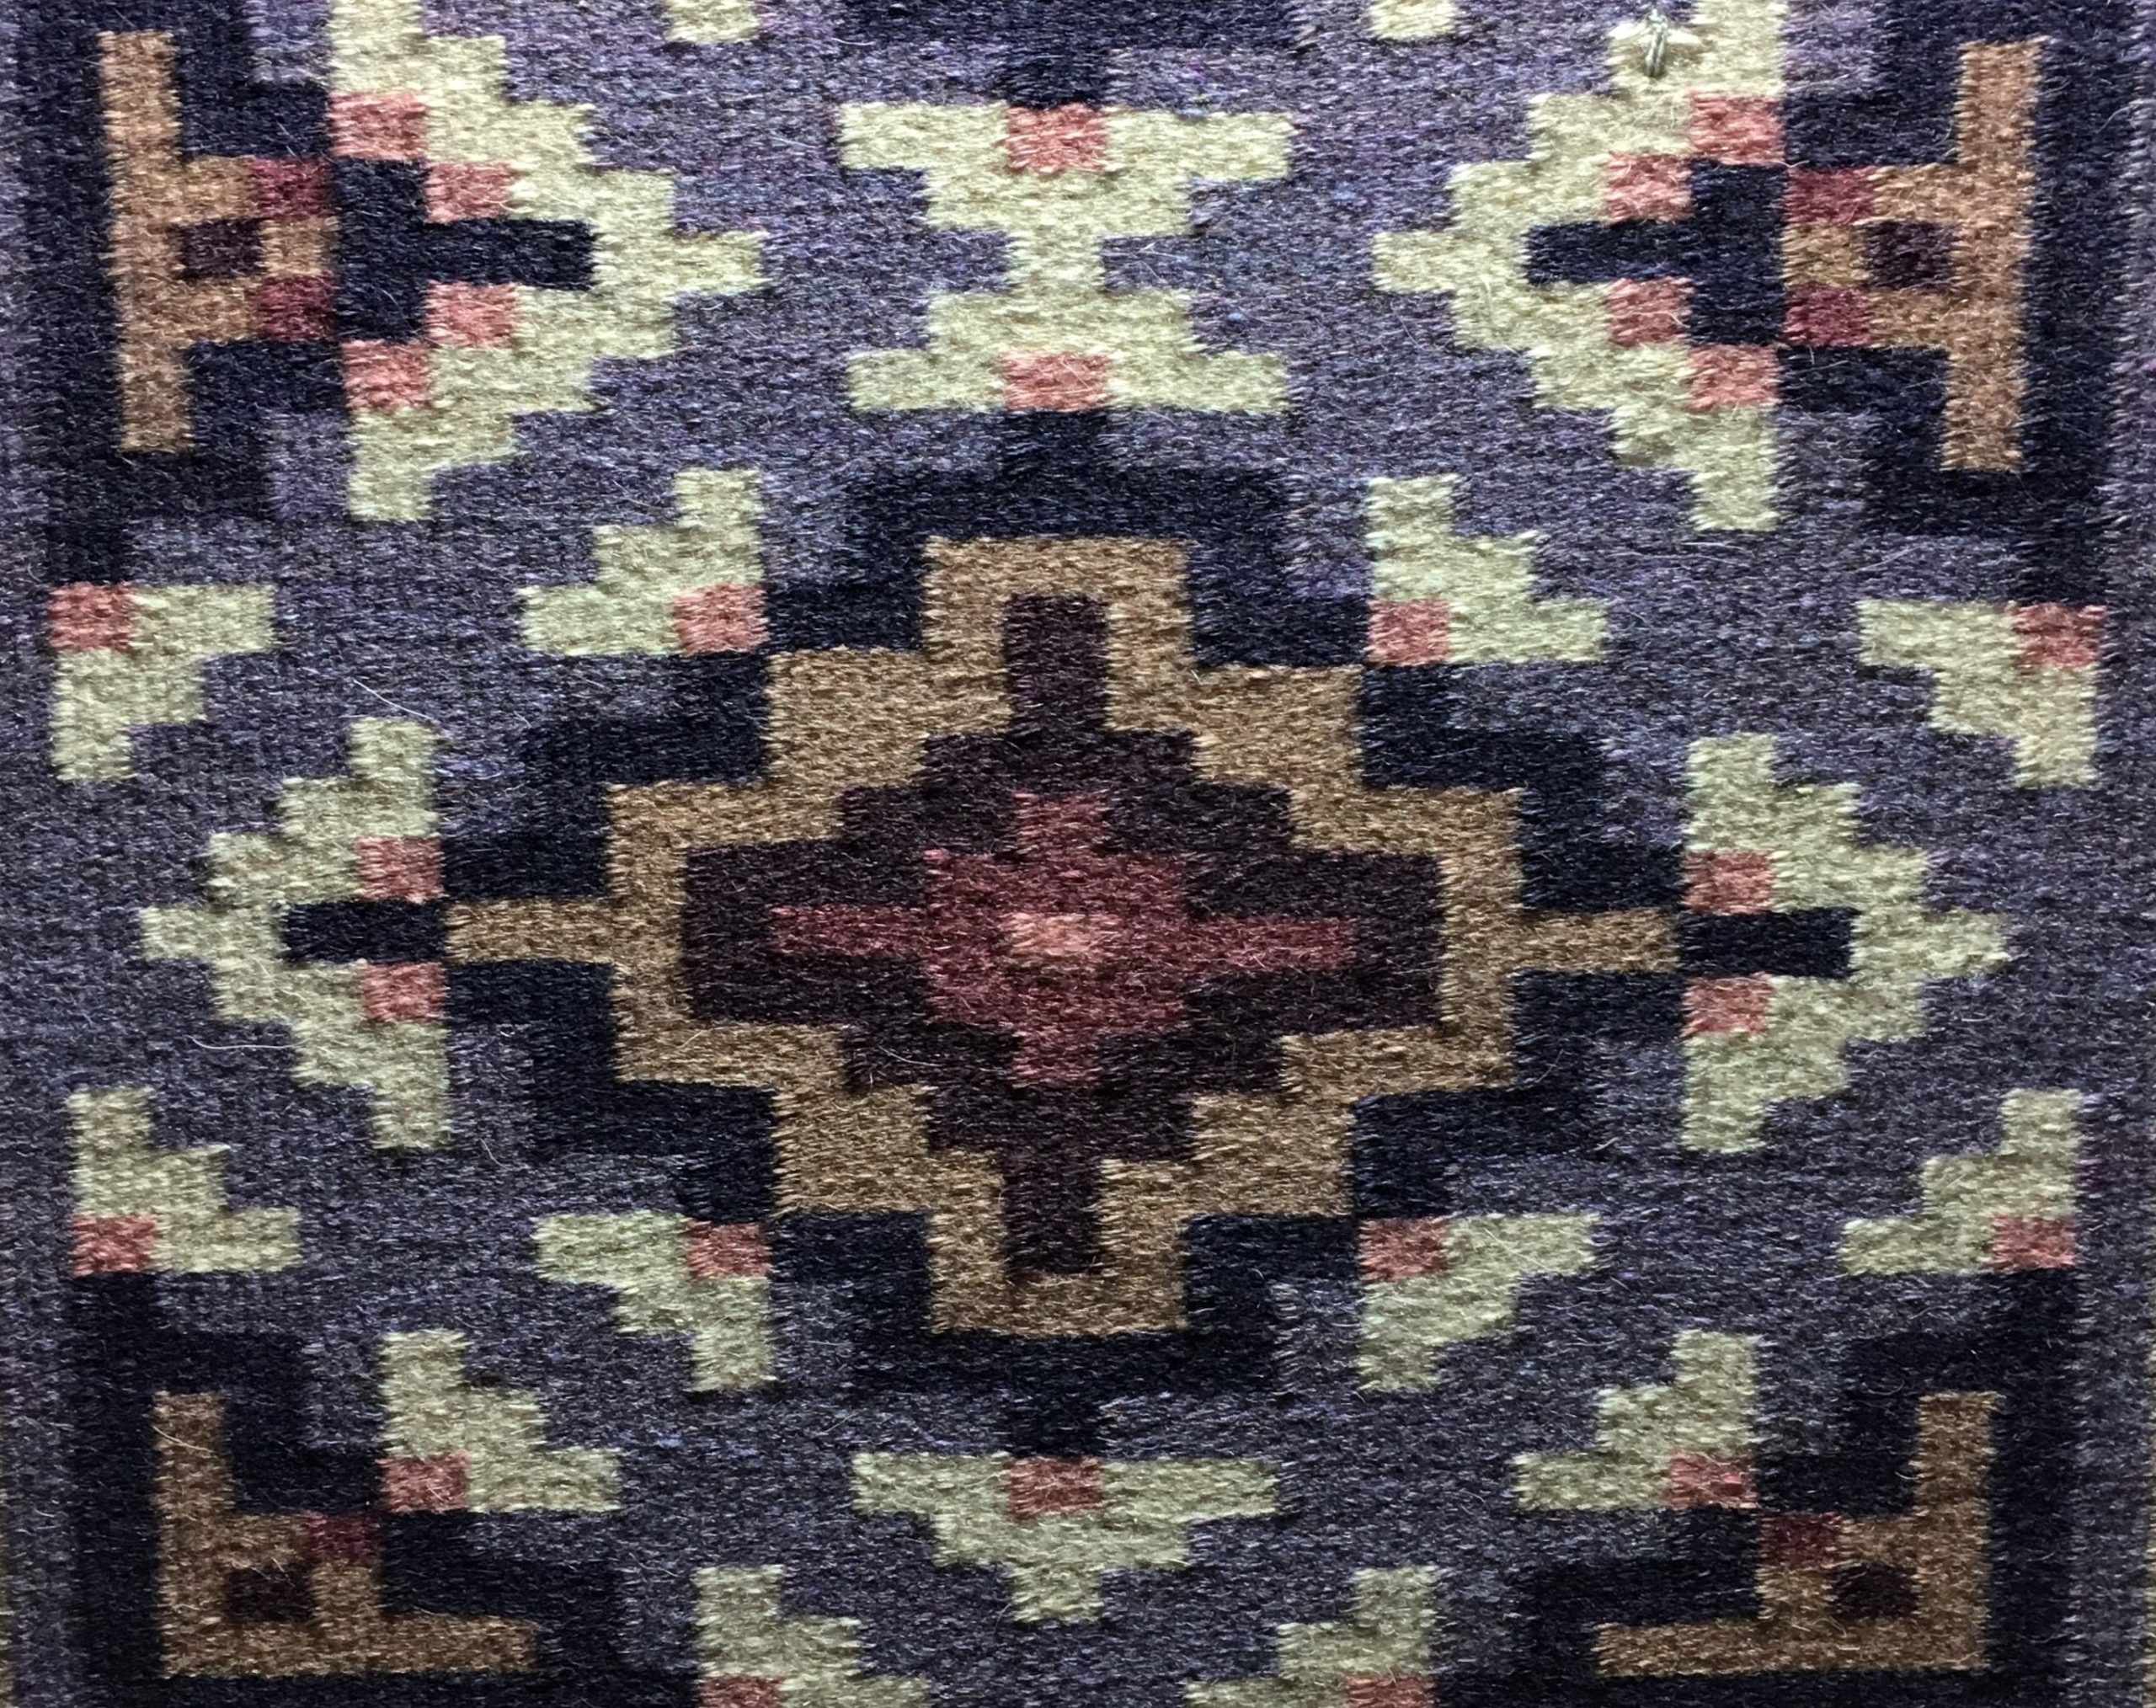 Weaving by Navajo Master Weaver Lynda Teller Pete, with geometric shapes in lavender, white, and light brown.